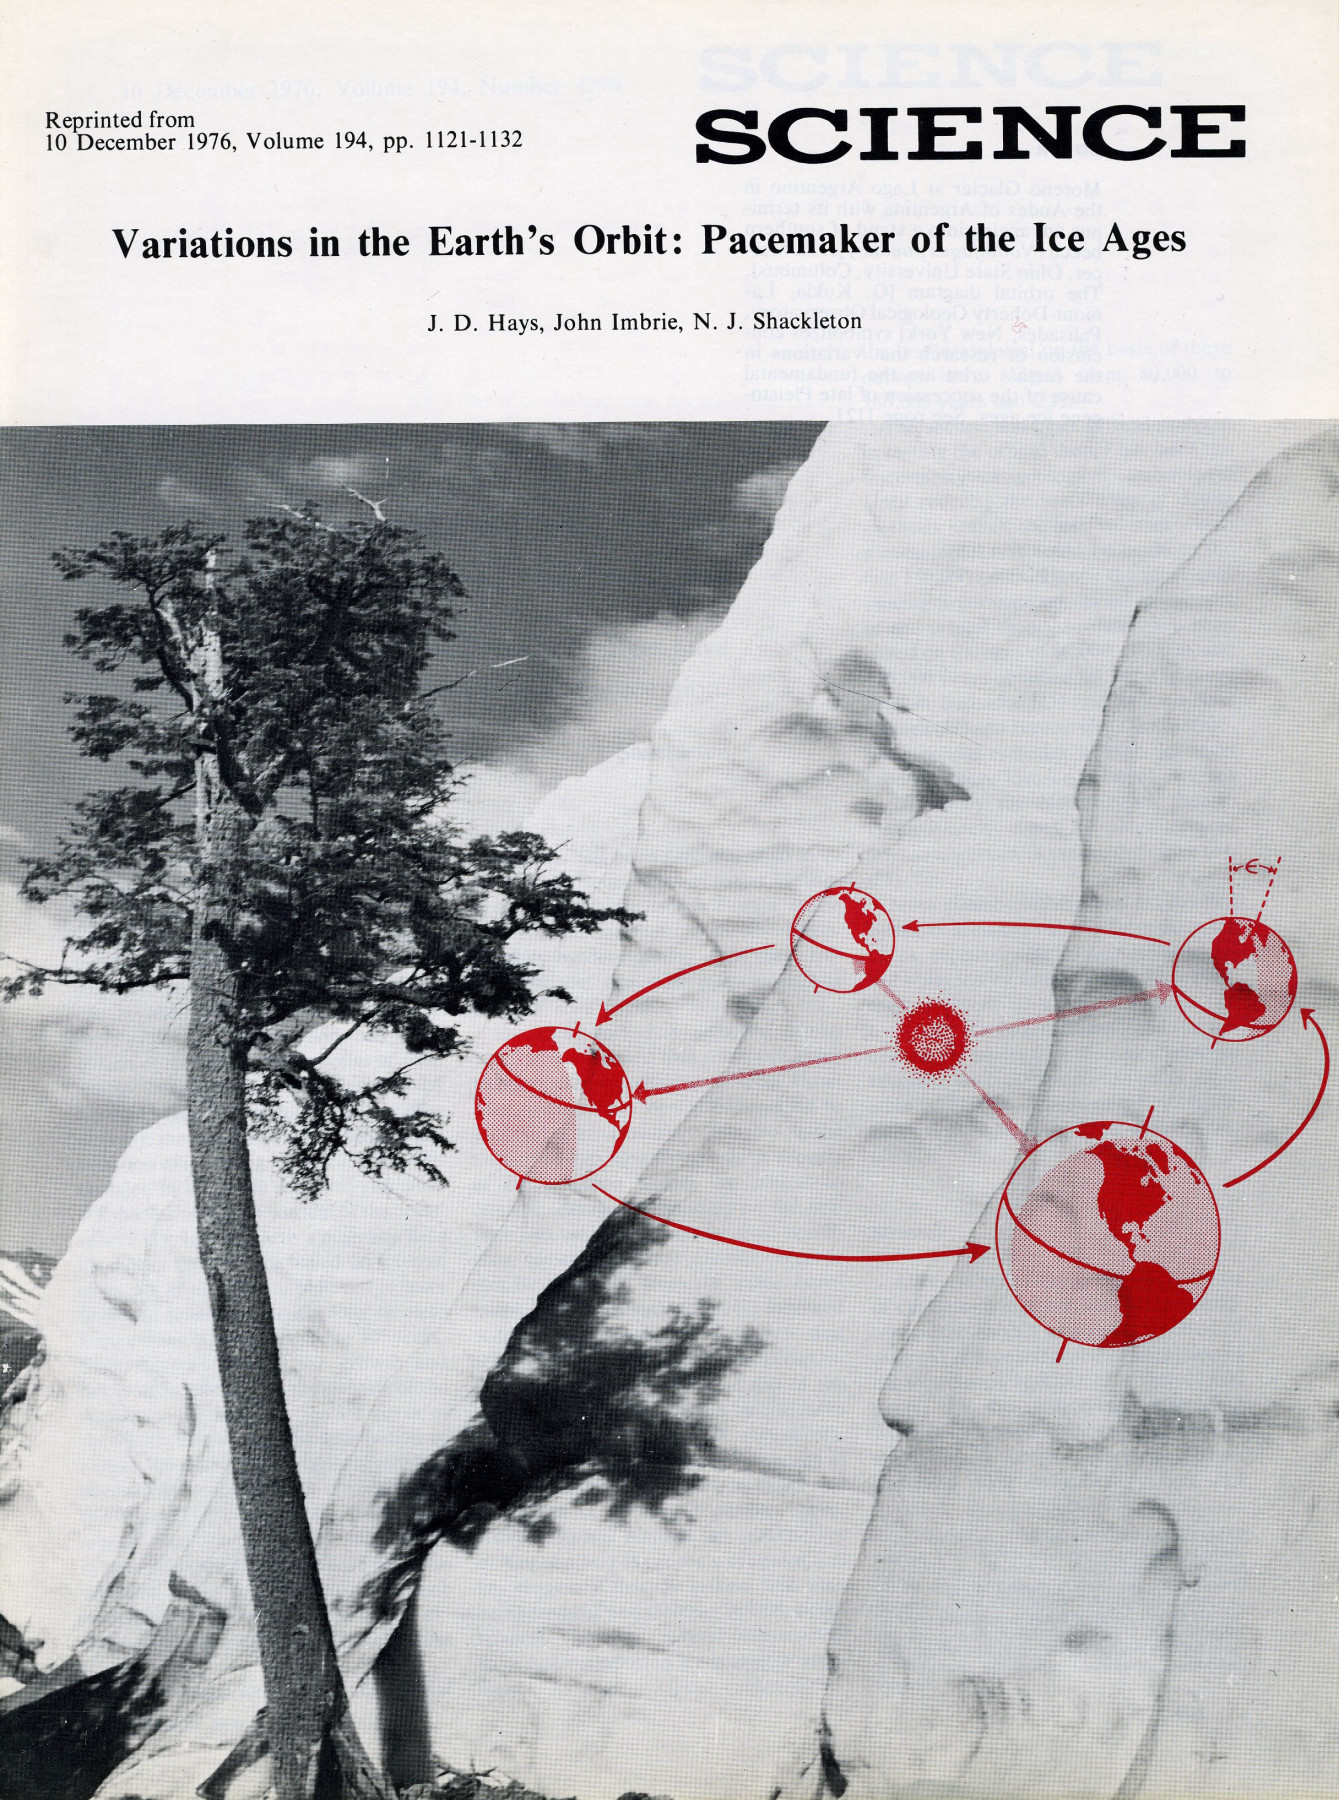 Cover of a reprint in the journal Science. Photo of a tree by a cliffside with a red illustration of Earth's orbit around the sun overimposed